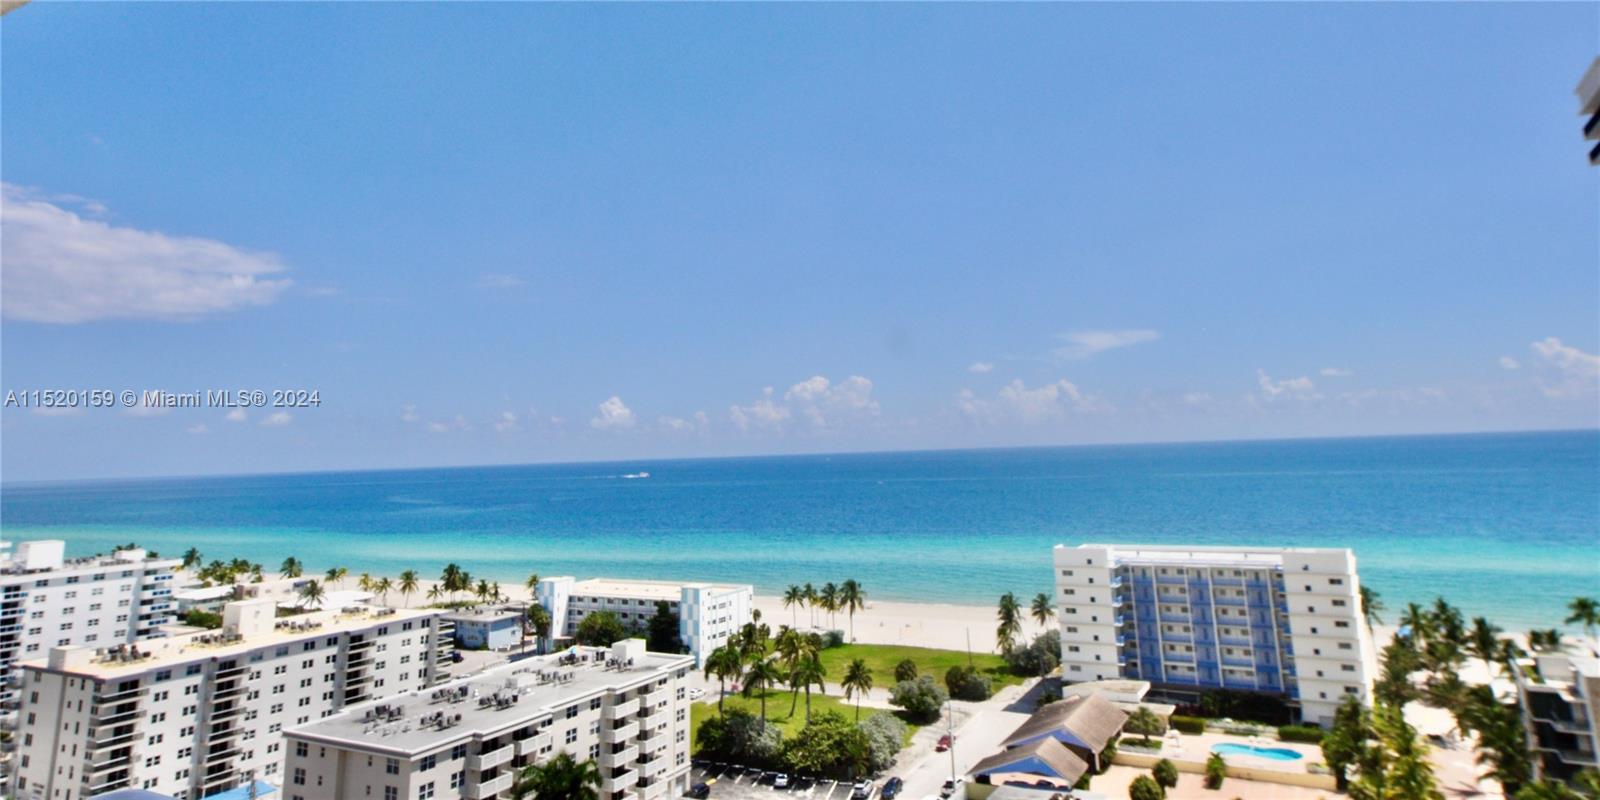 Photo of 1600 S Ocean Dr #18I in Hollywood, FL